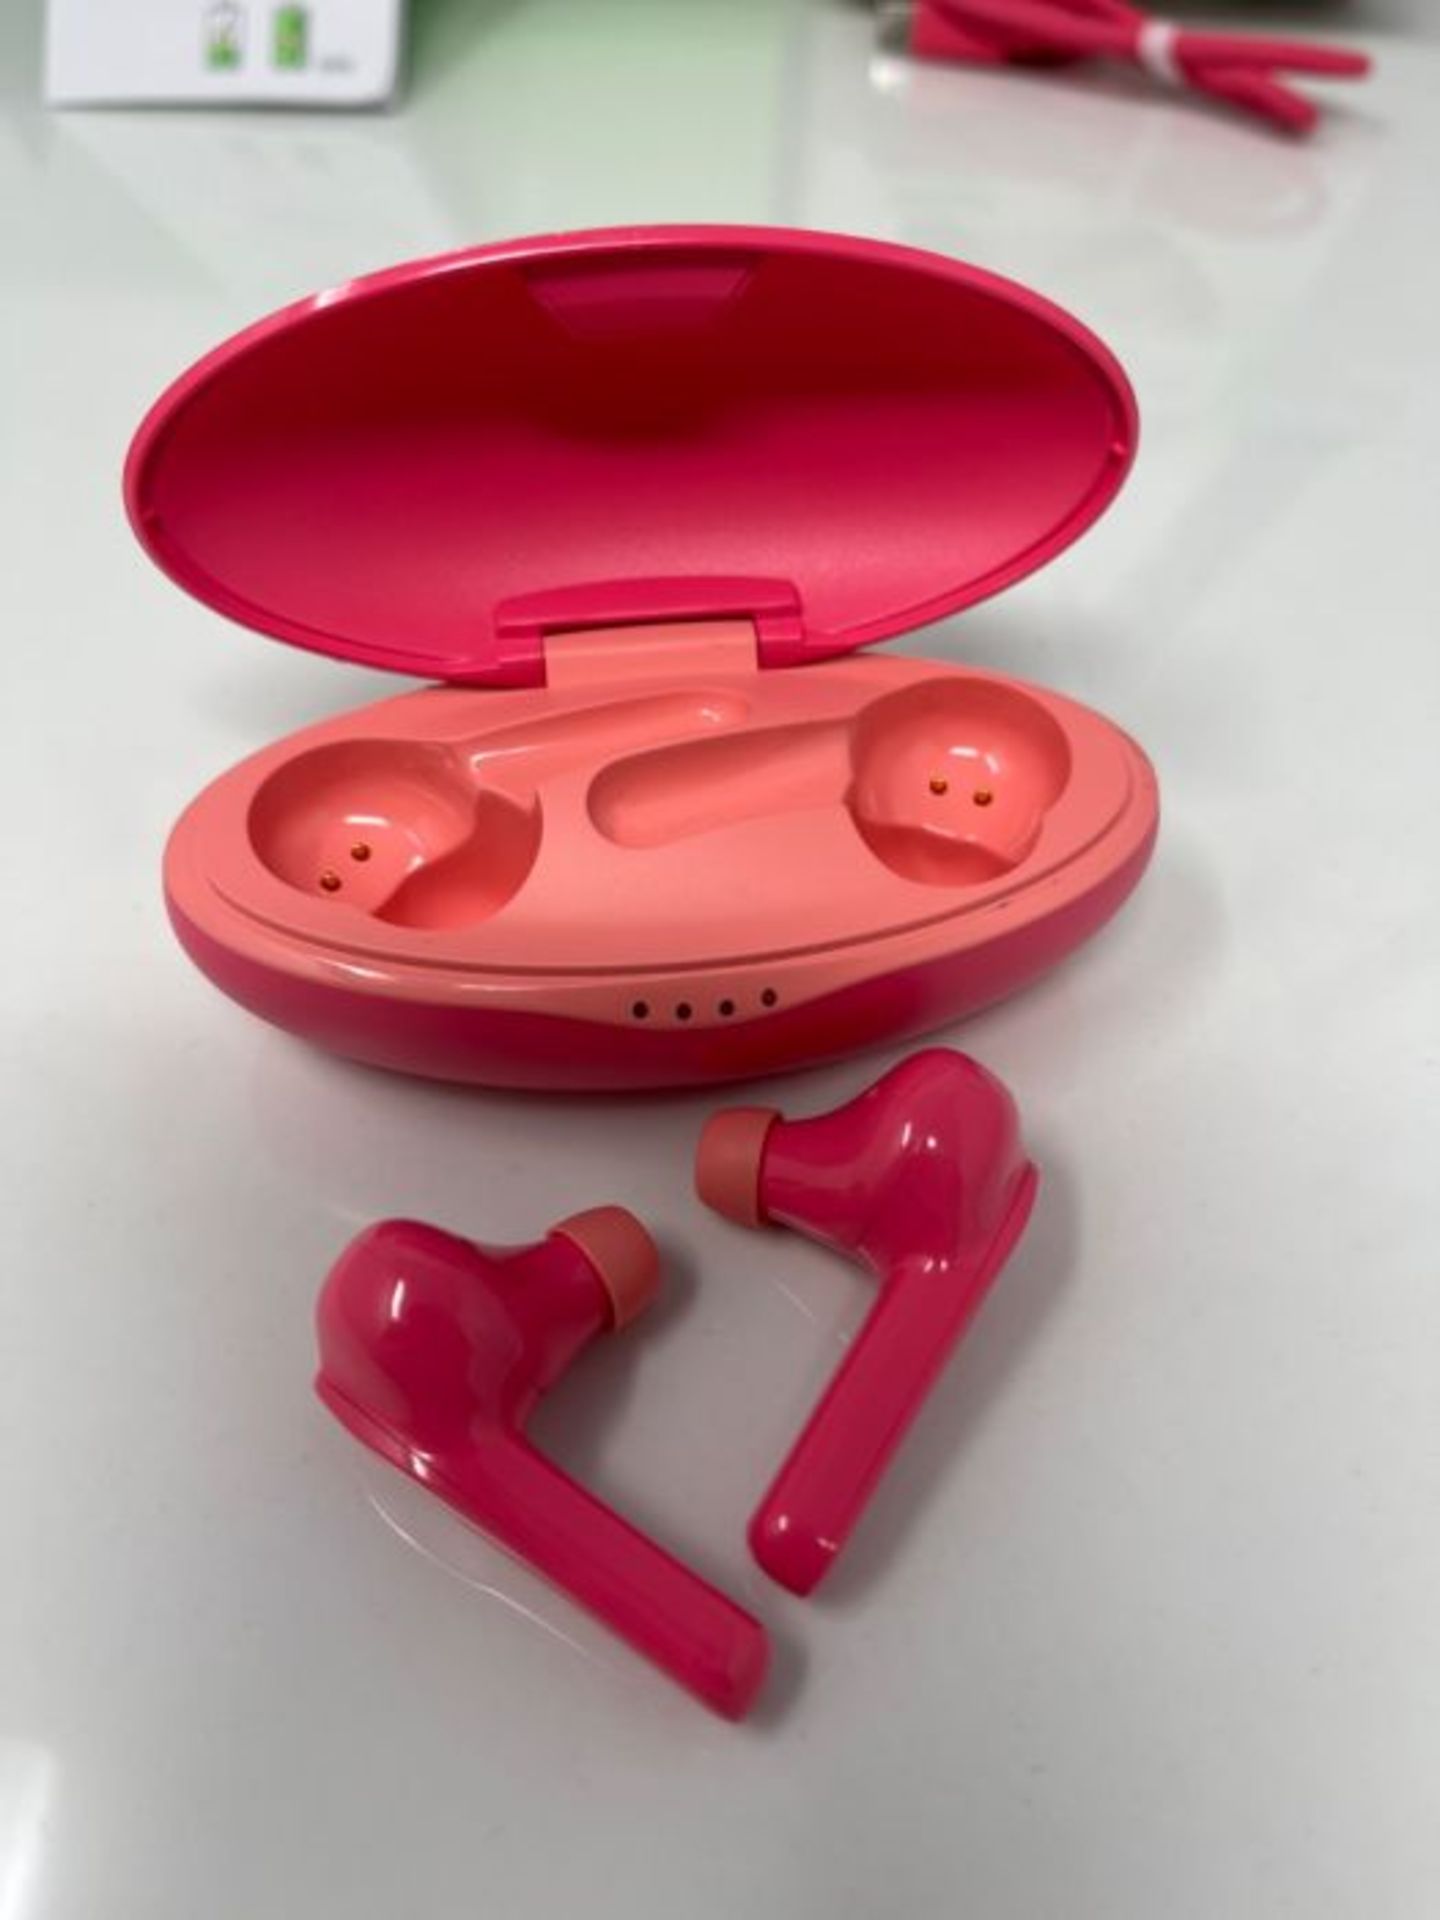 Belkin SOUNDFORM Nano, True Wireless Earbuds for Kids, 85dB Limit for Ear Protection, - Image 3 of 3